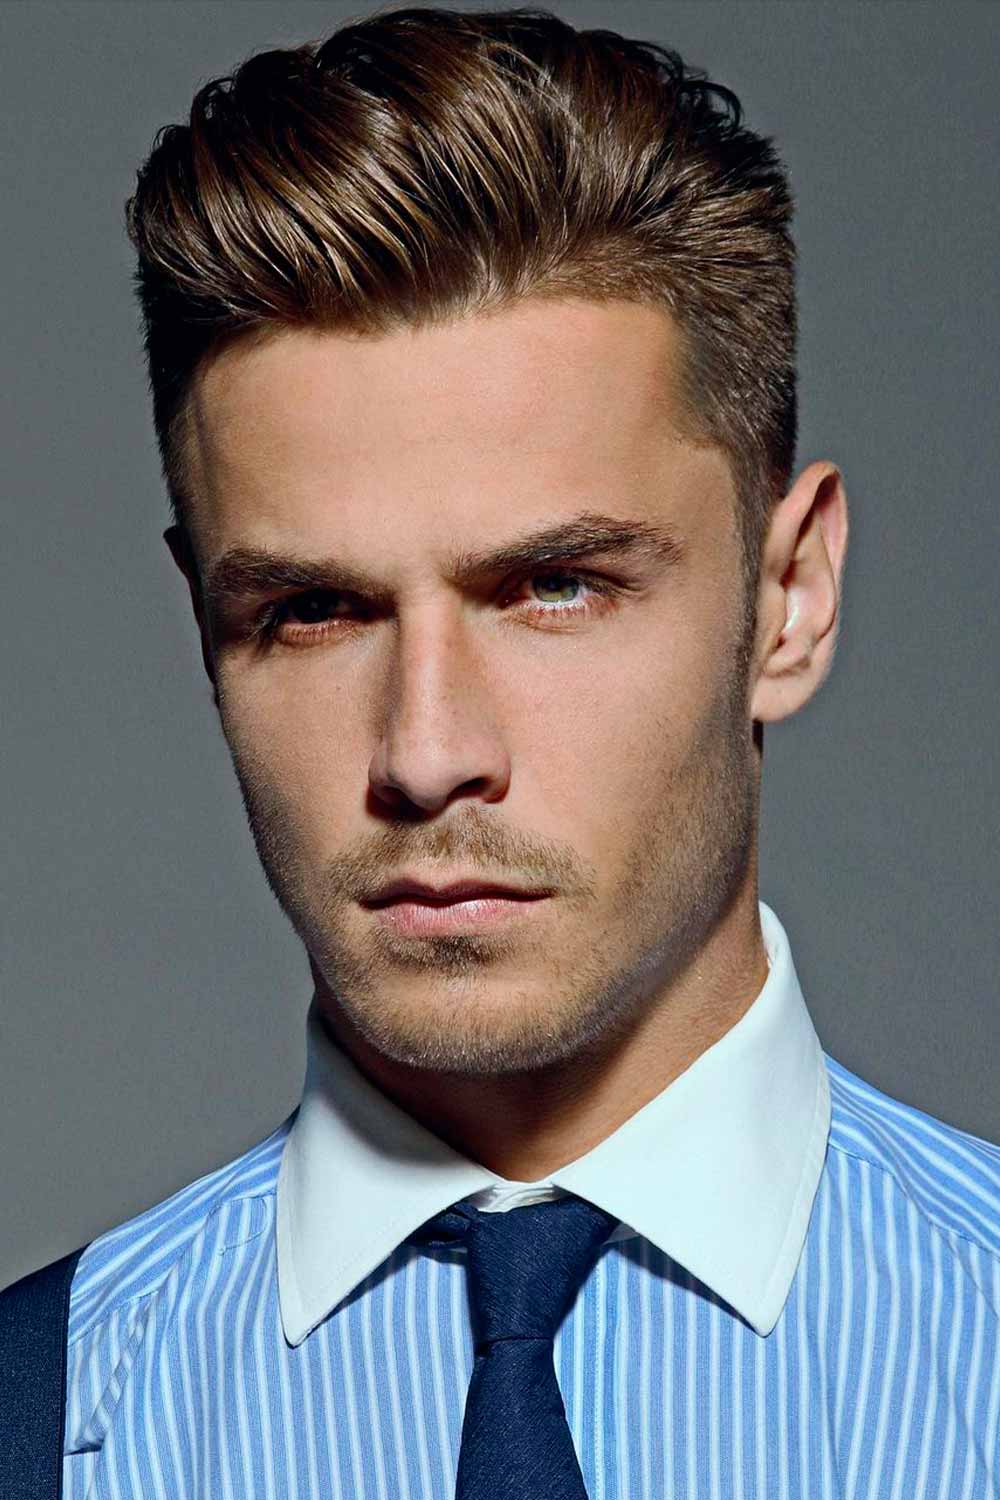 Gentleman's Haircut Ideas In Trend Right Now | MensHairCuts.com